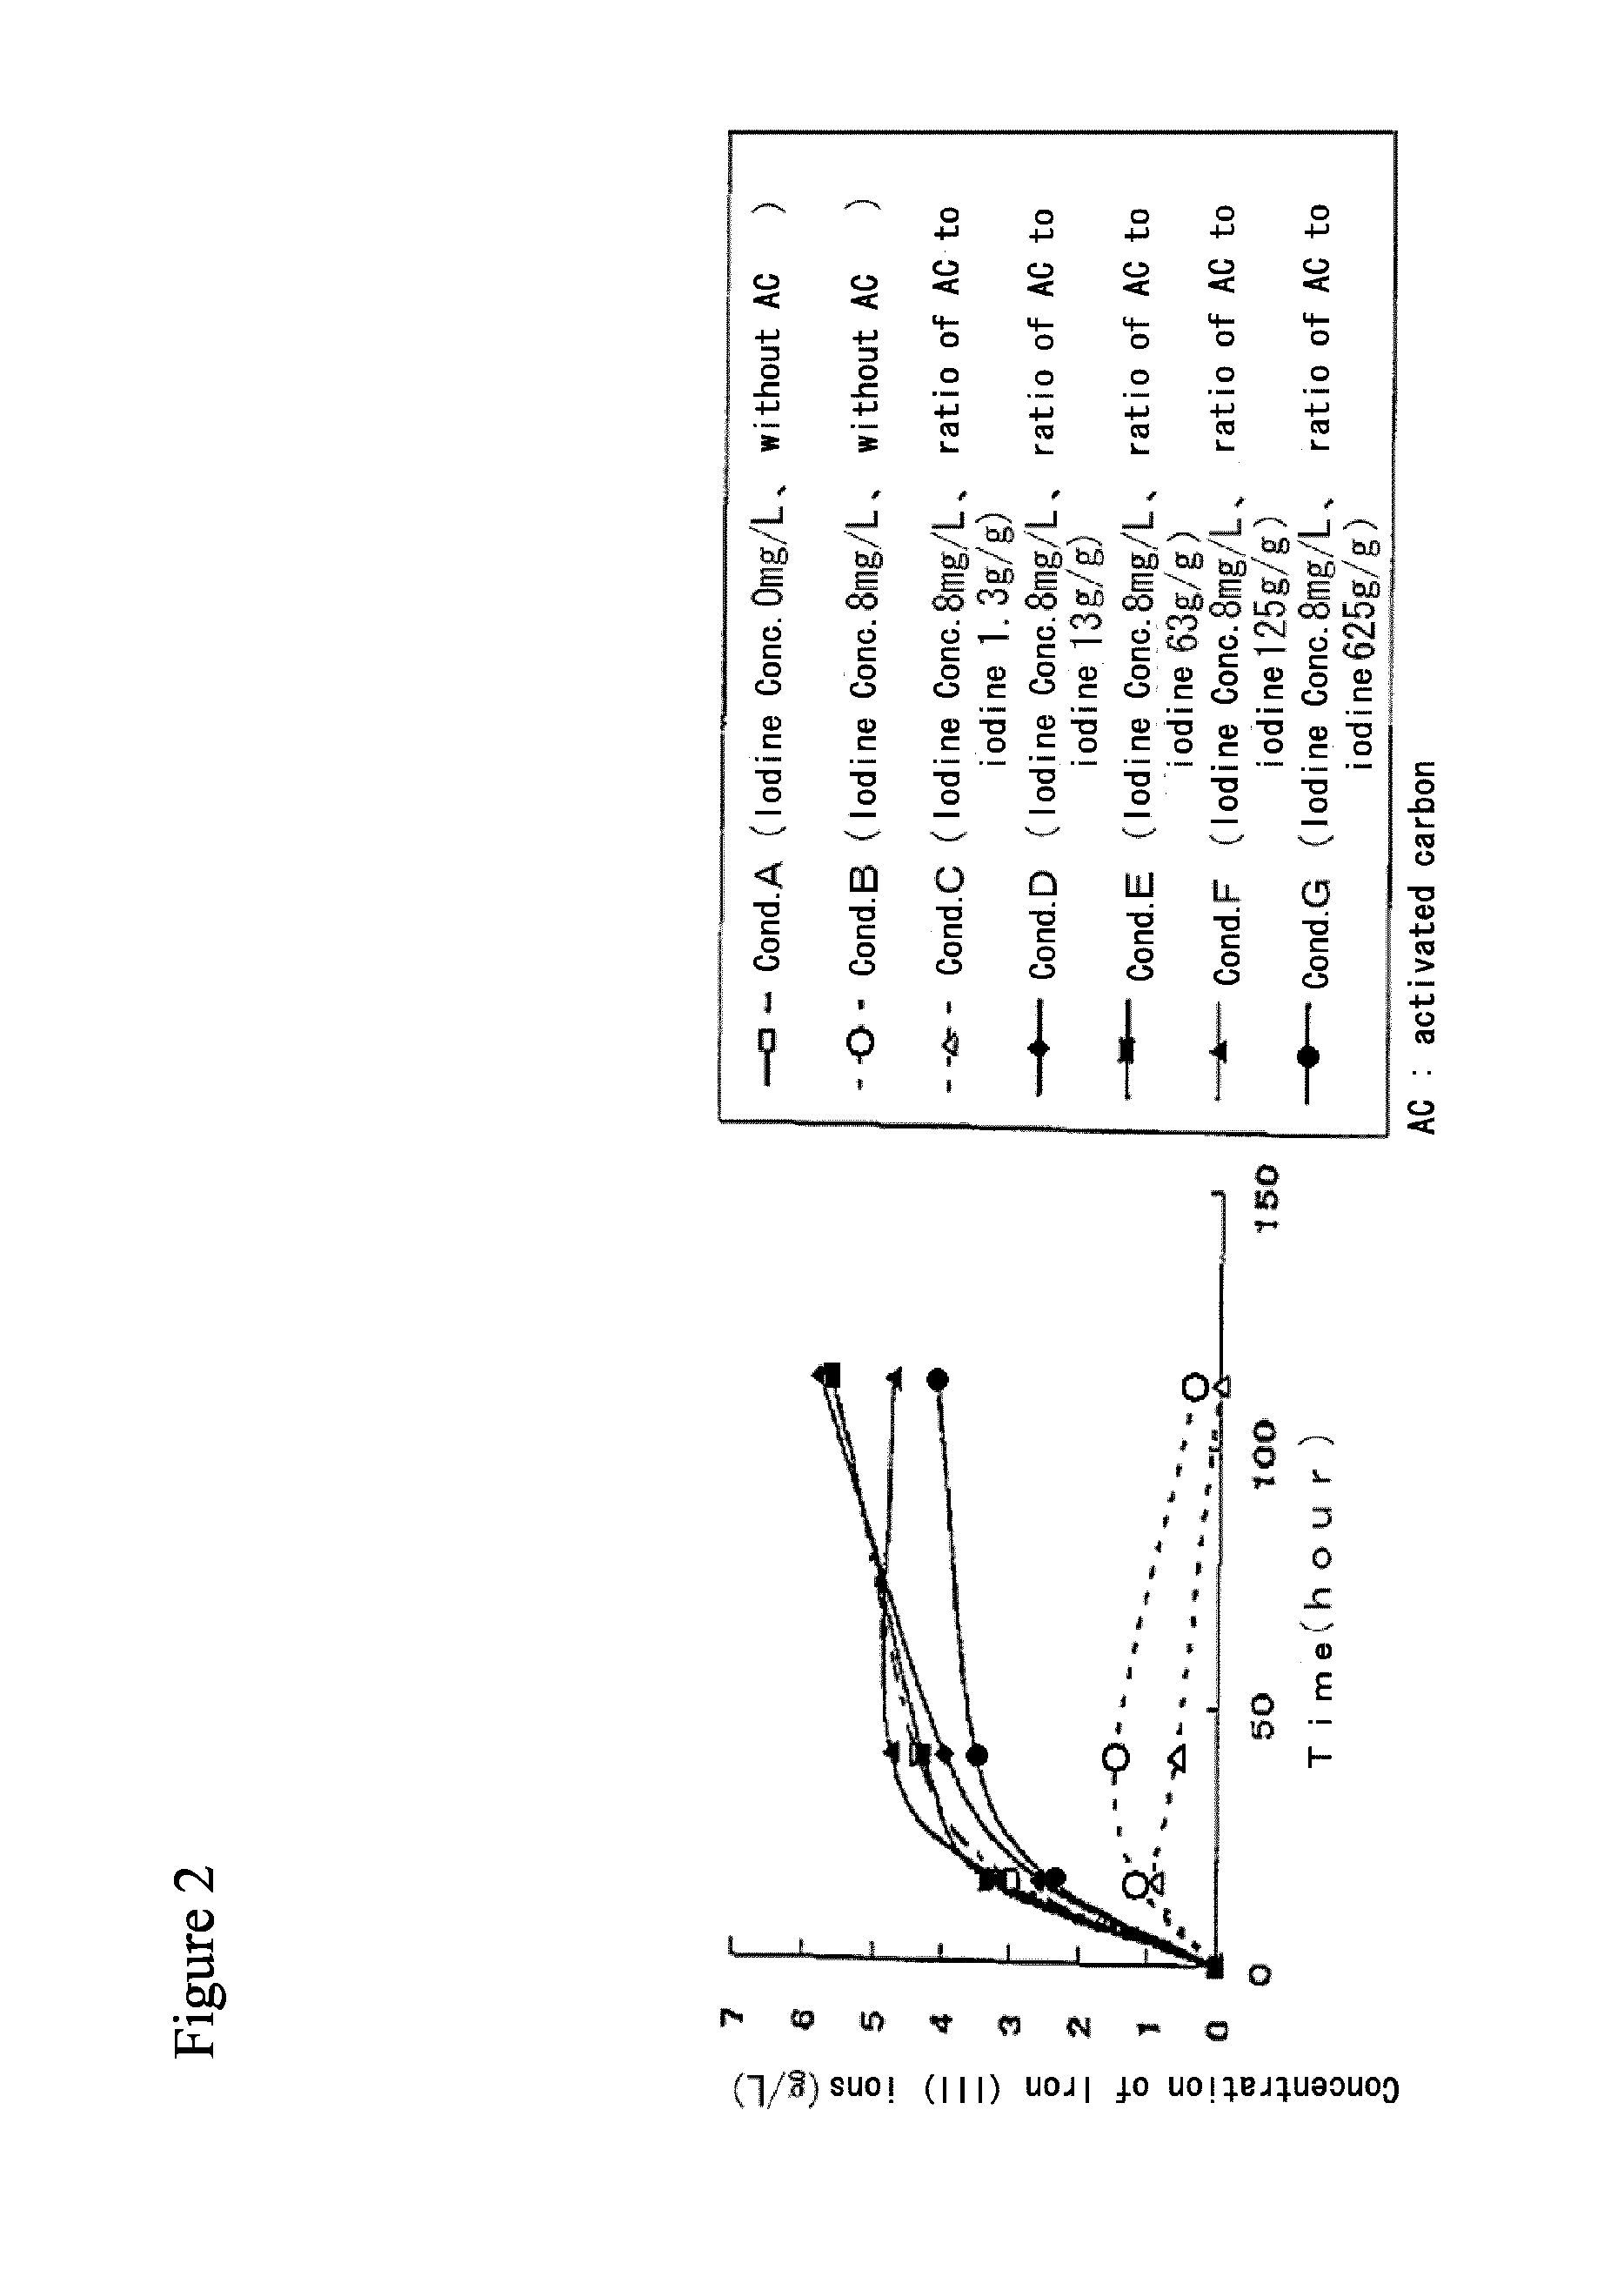 Method for processing acidic solution that contains iodide ions and iron ions